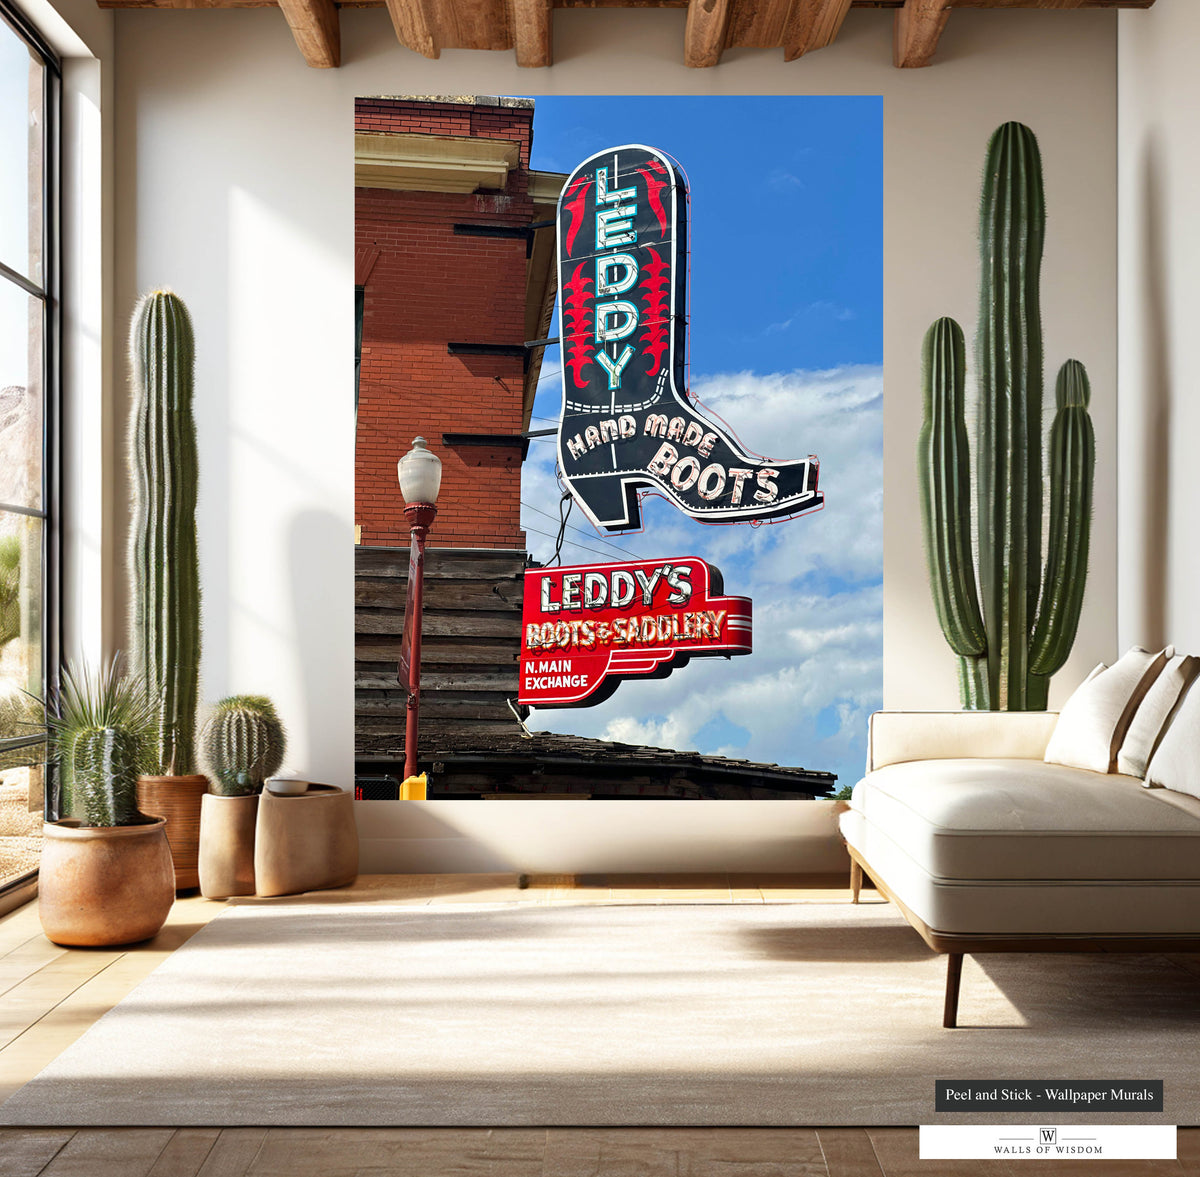 Peel and stick mural of Ft. Worth Stockyard neon sign, perfect for home bar decor.